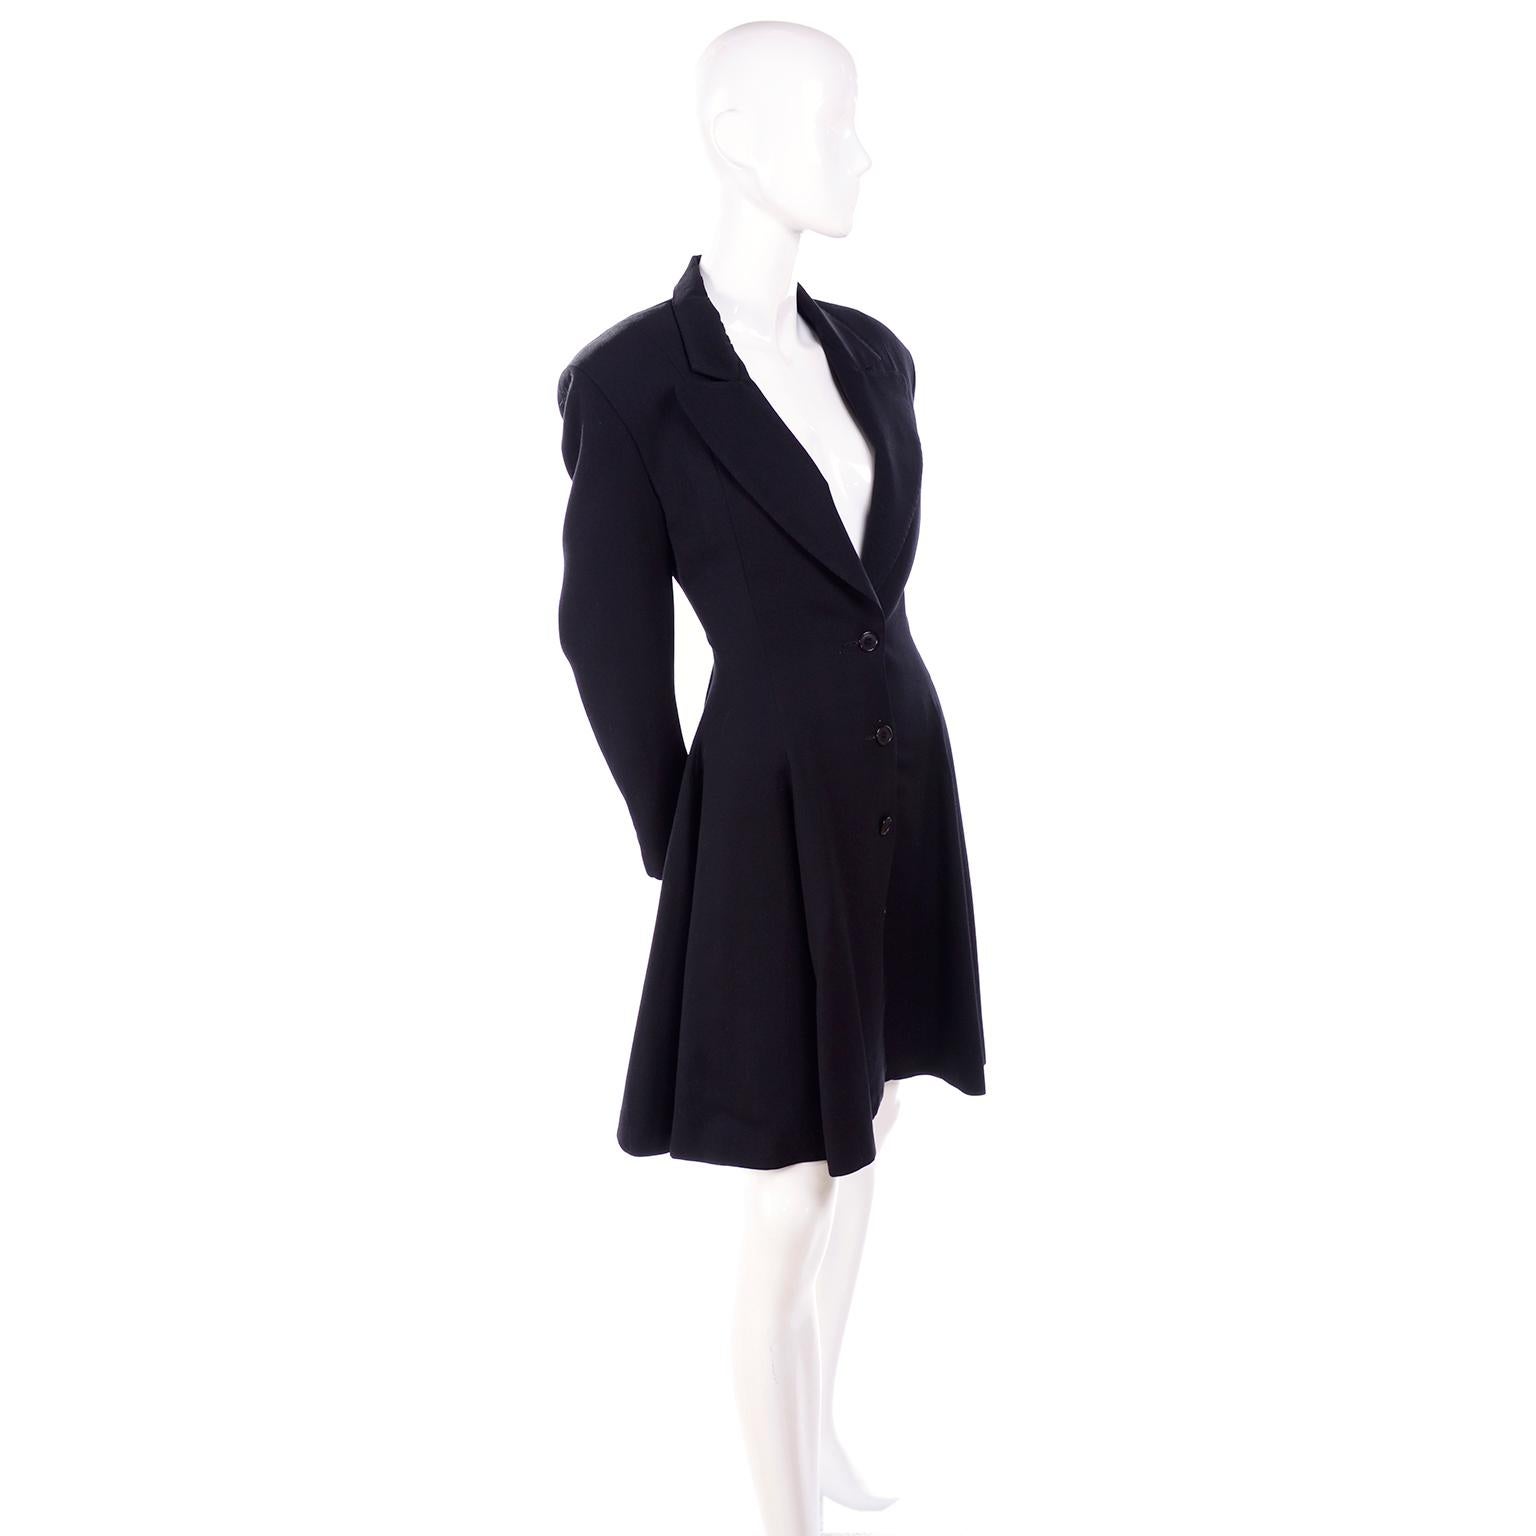 This is a wonderful vintage jacket from the 1980's designed by Norma Kamali. This black wool blazer is tapered at the waist and full from the waist down. Fully lined with side slit pockets, the jacket fits a size 4. There are built in shoulder pads